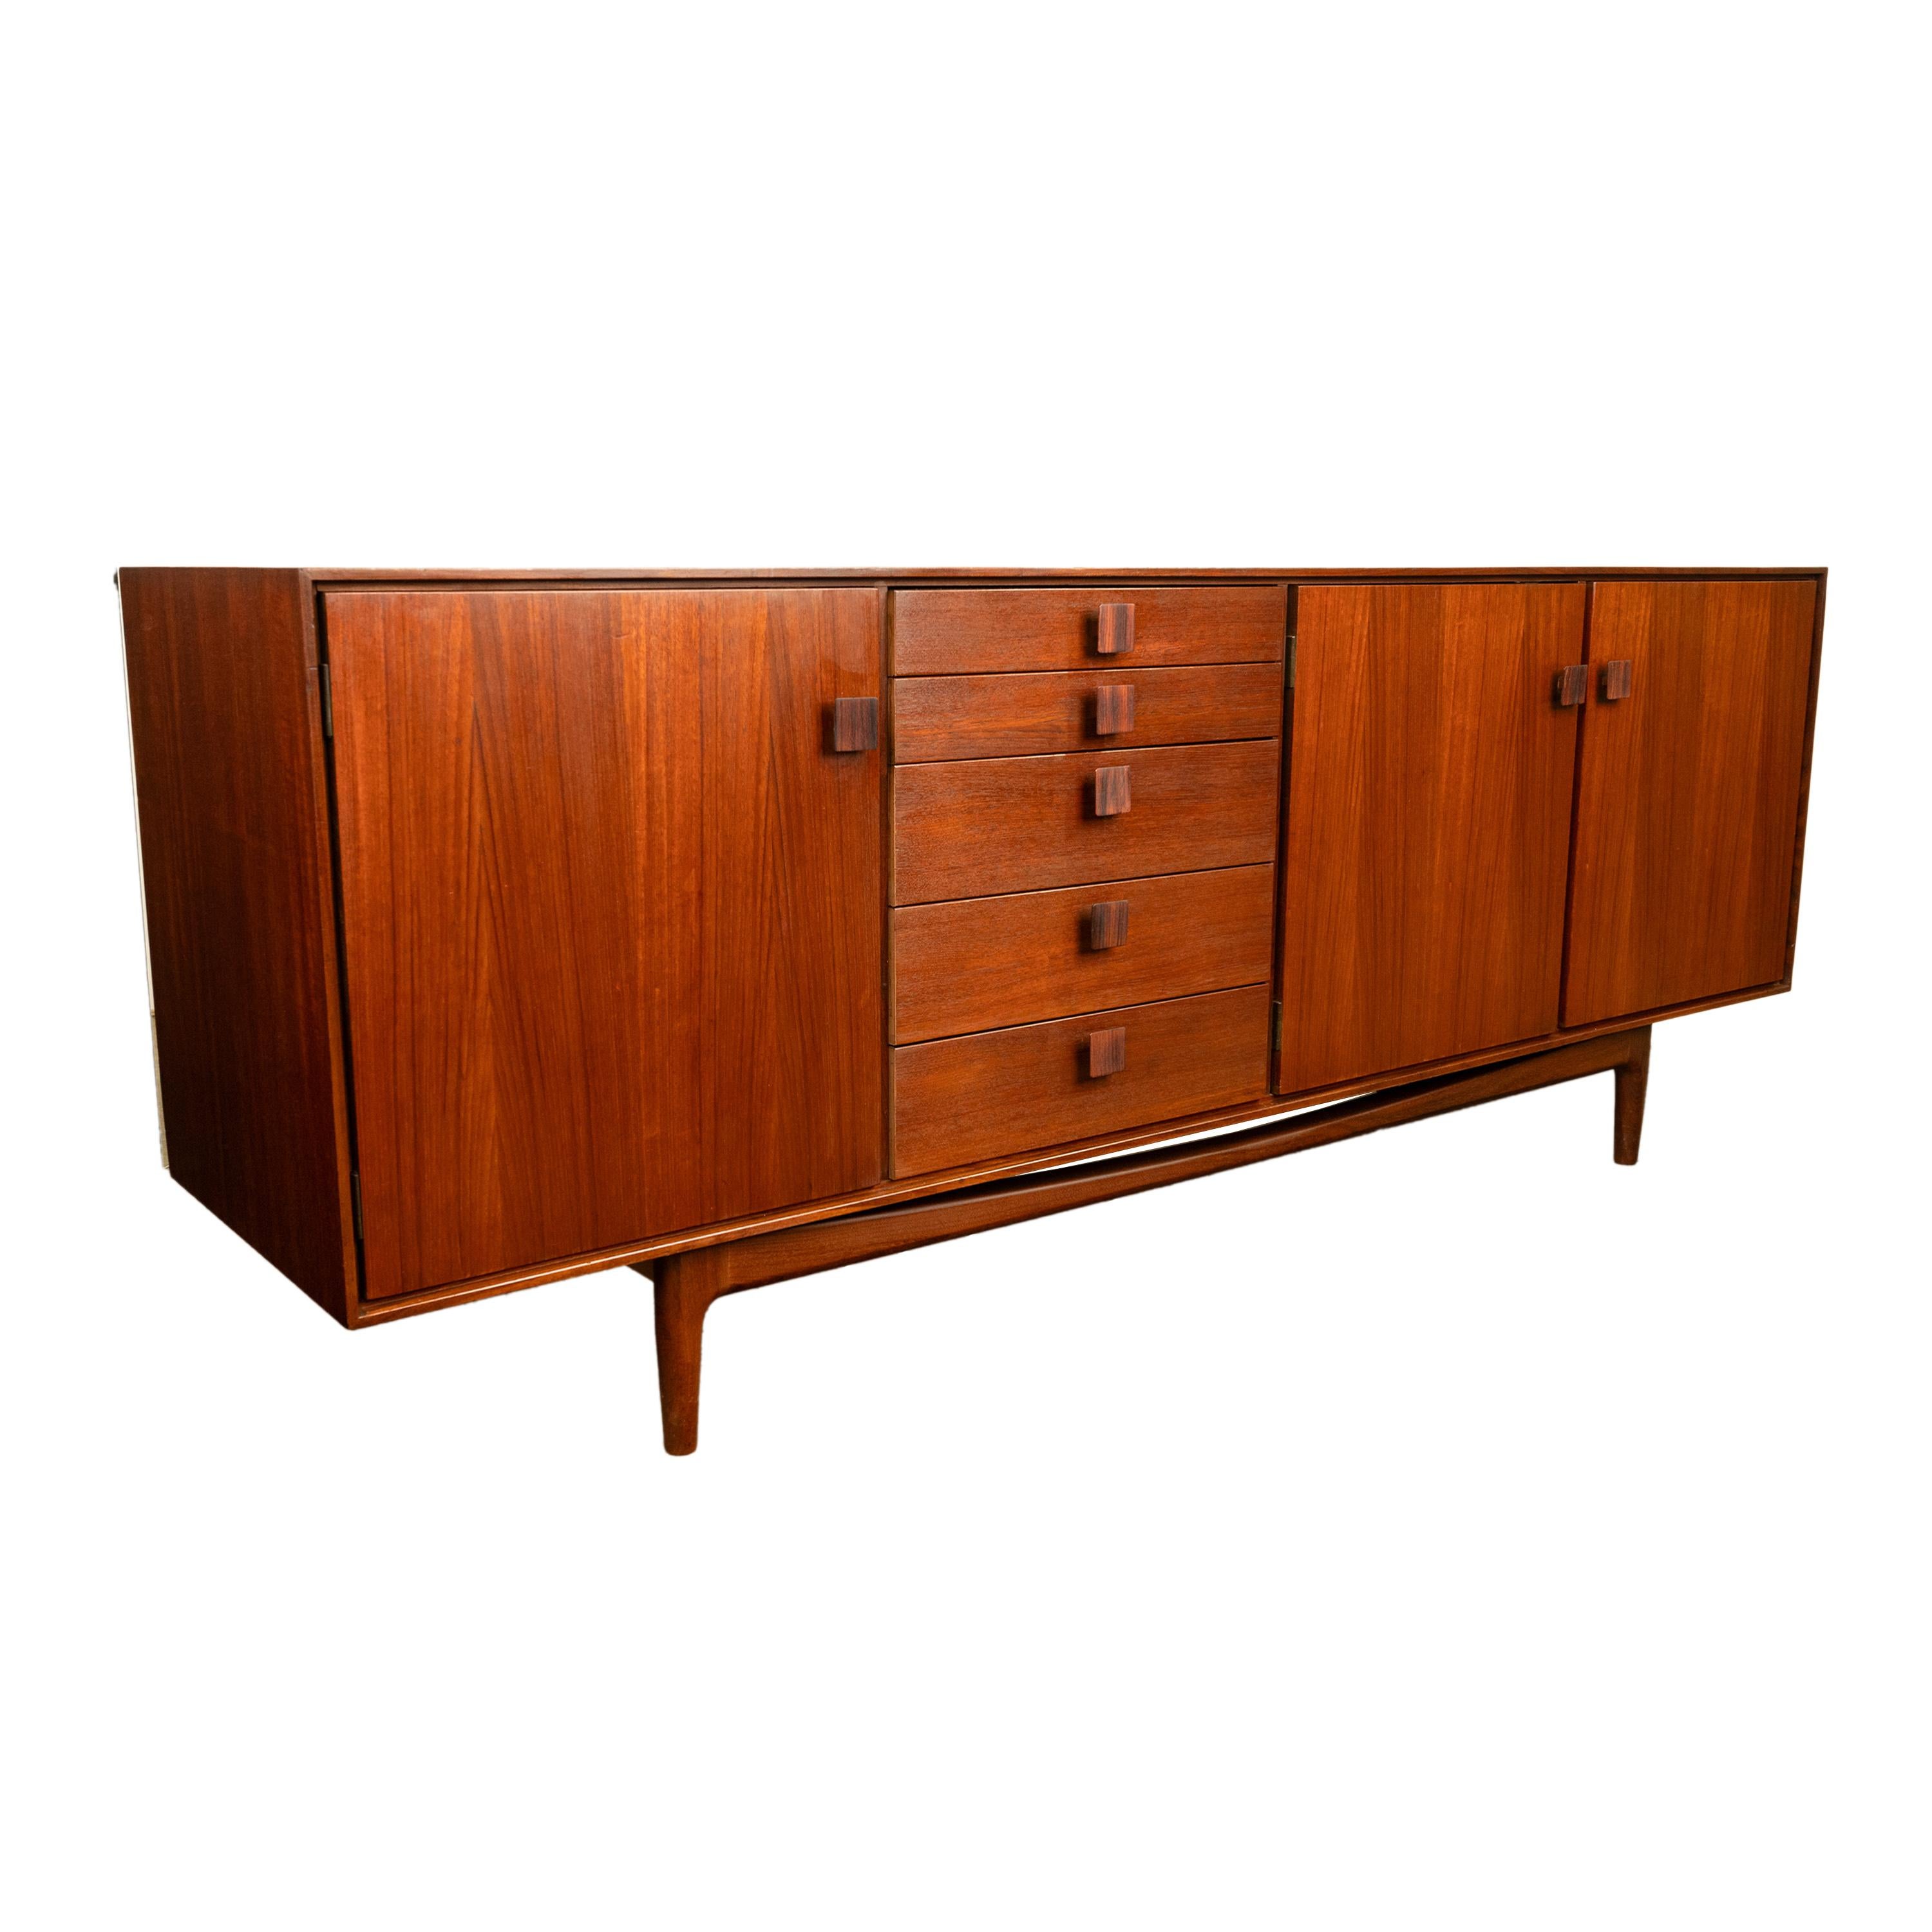 A very good original Mid Century Modern teak Credenza designed by IB Kofod Larsen, for G Plan's Danish range in 1965.
The credenza is the longer of two designs this one having three doors and a bank of five graduated drawers, there was also a